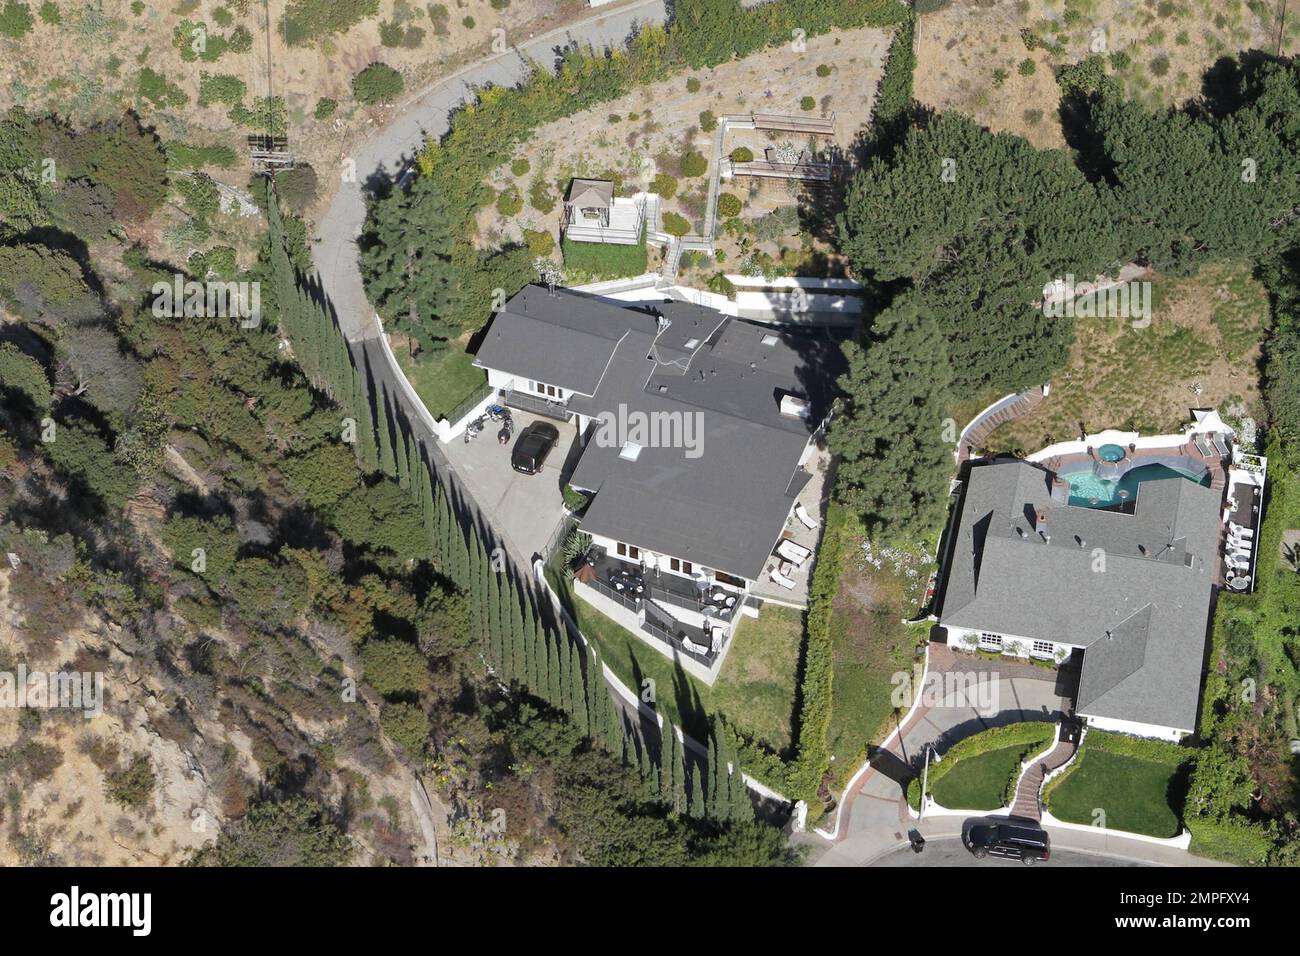 Aerial views of the $1.9 million dollar home Russell Brand reportedly  purchased in the Prestigious Doheny Estates section of the Hollywood Hills  after his his break-up with estranged wife Katy Perry. The